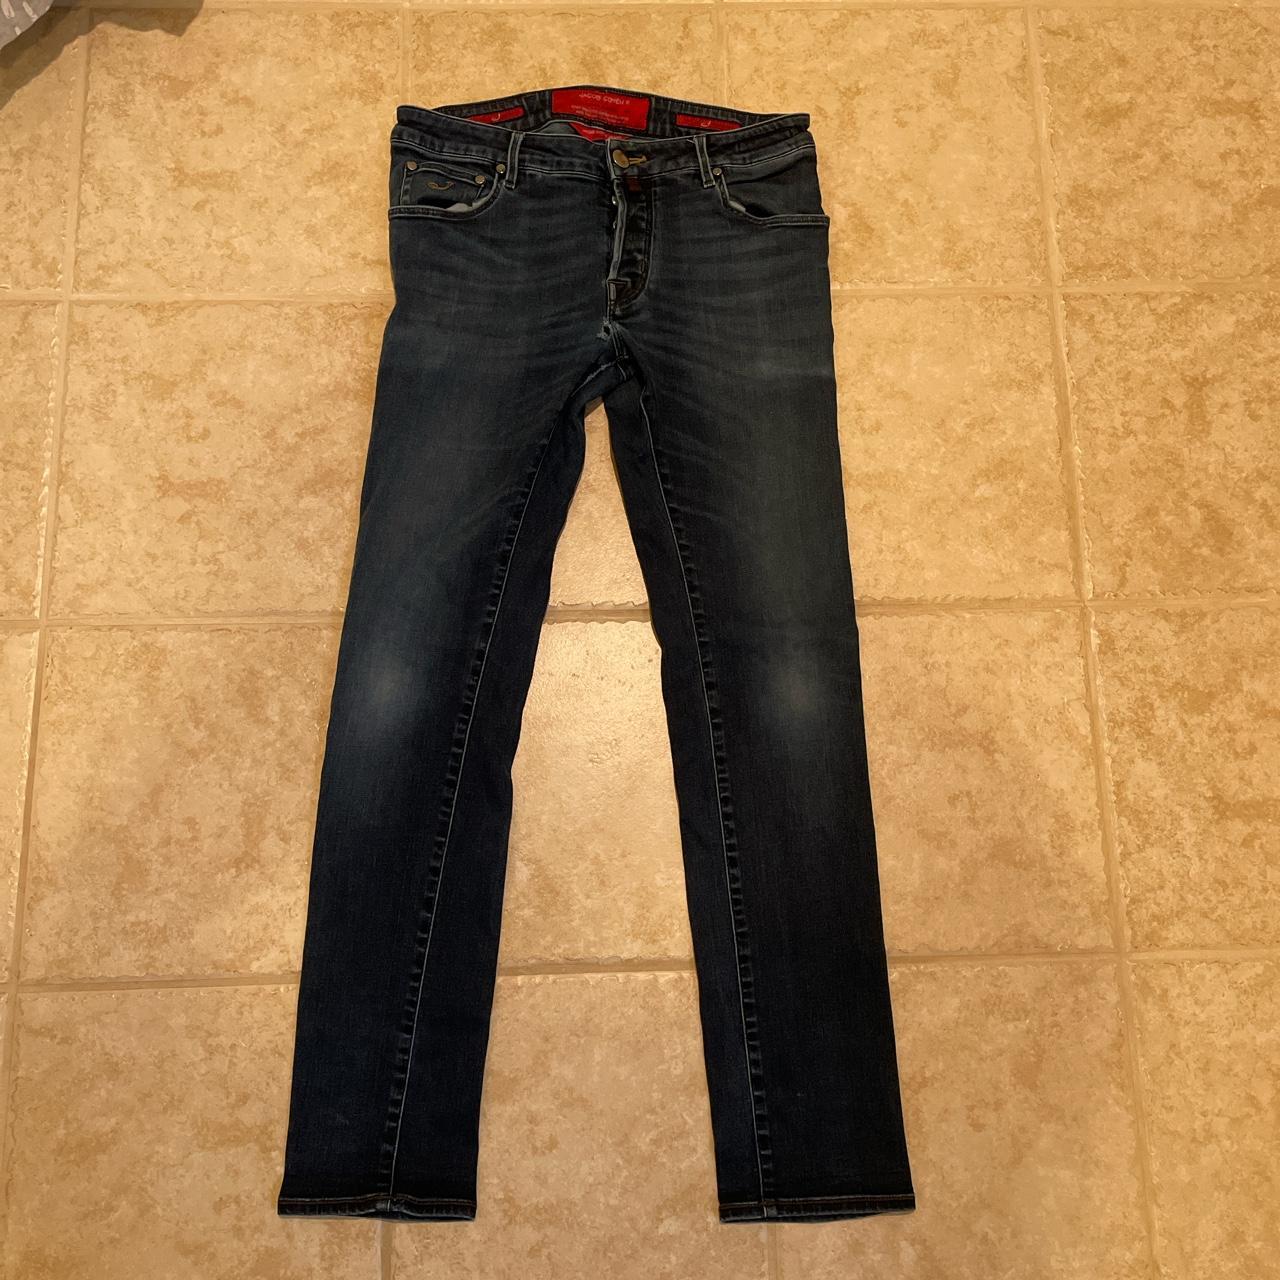 Product Image 2 - Jacob Cohen Tailored Denim Jeans

Retailed